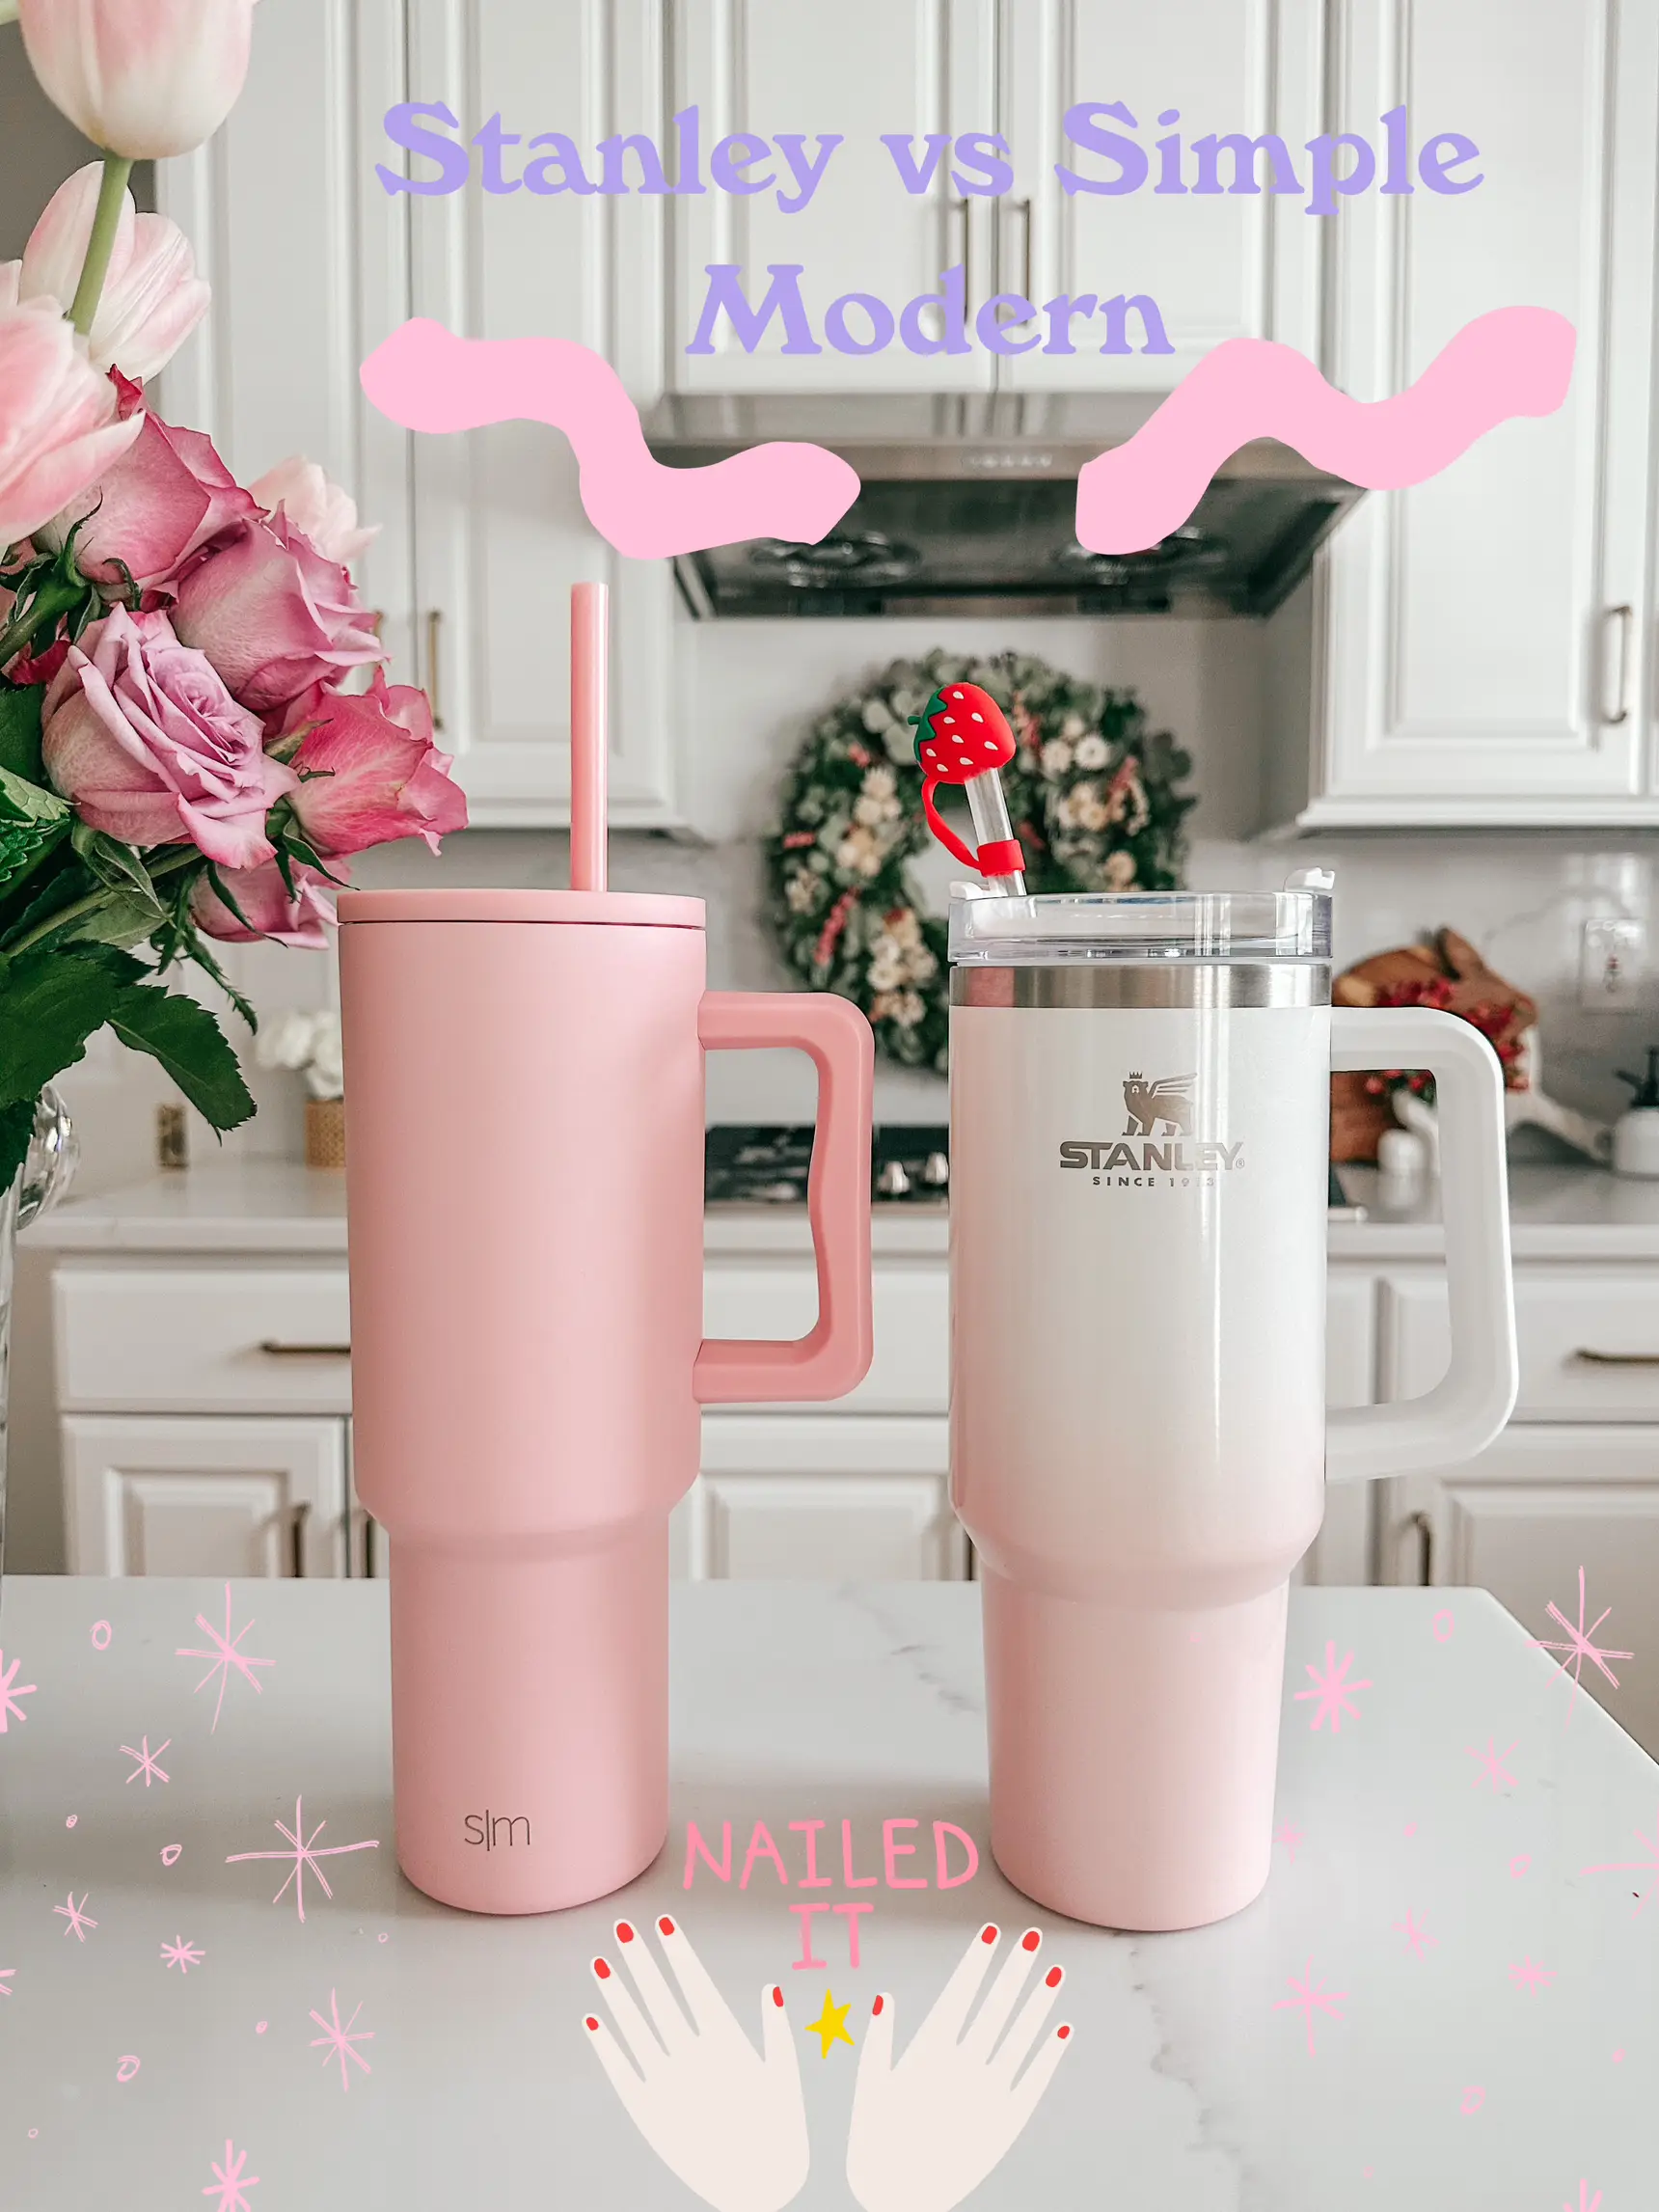 Im actually screaming at how cute this is #simplemoderncup